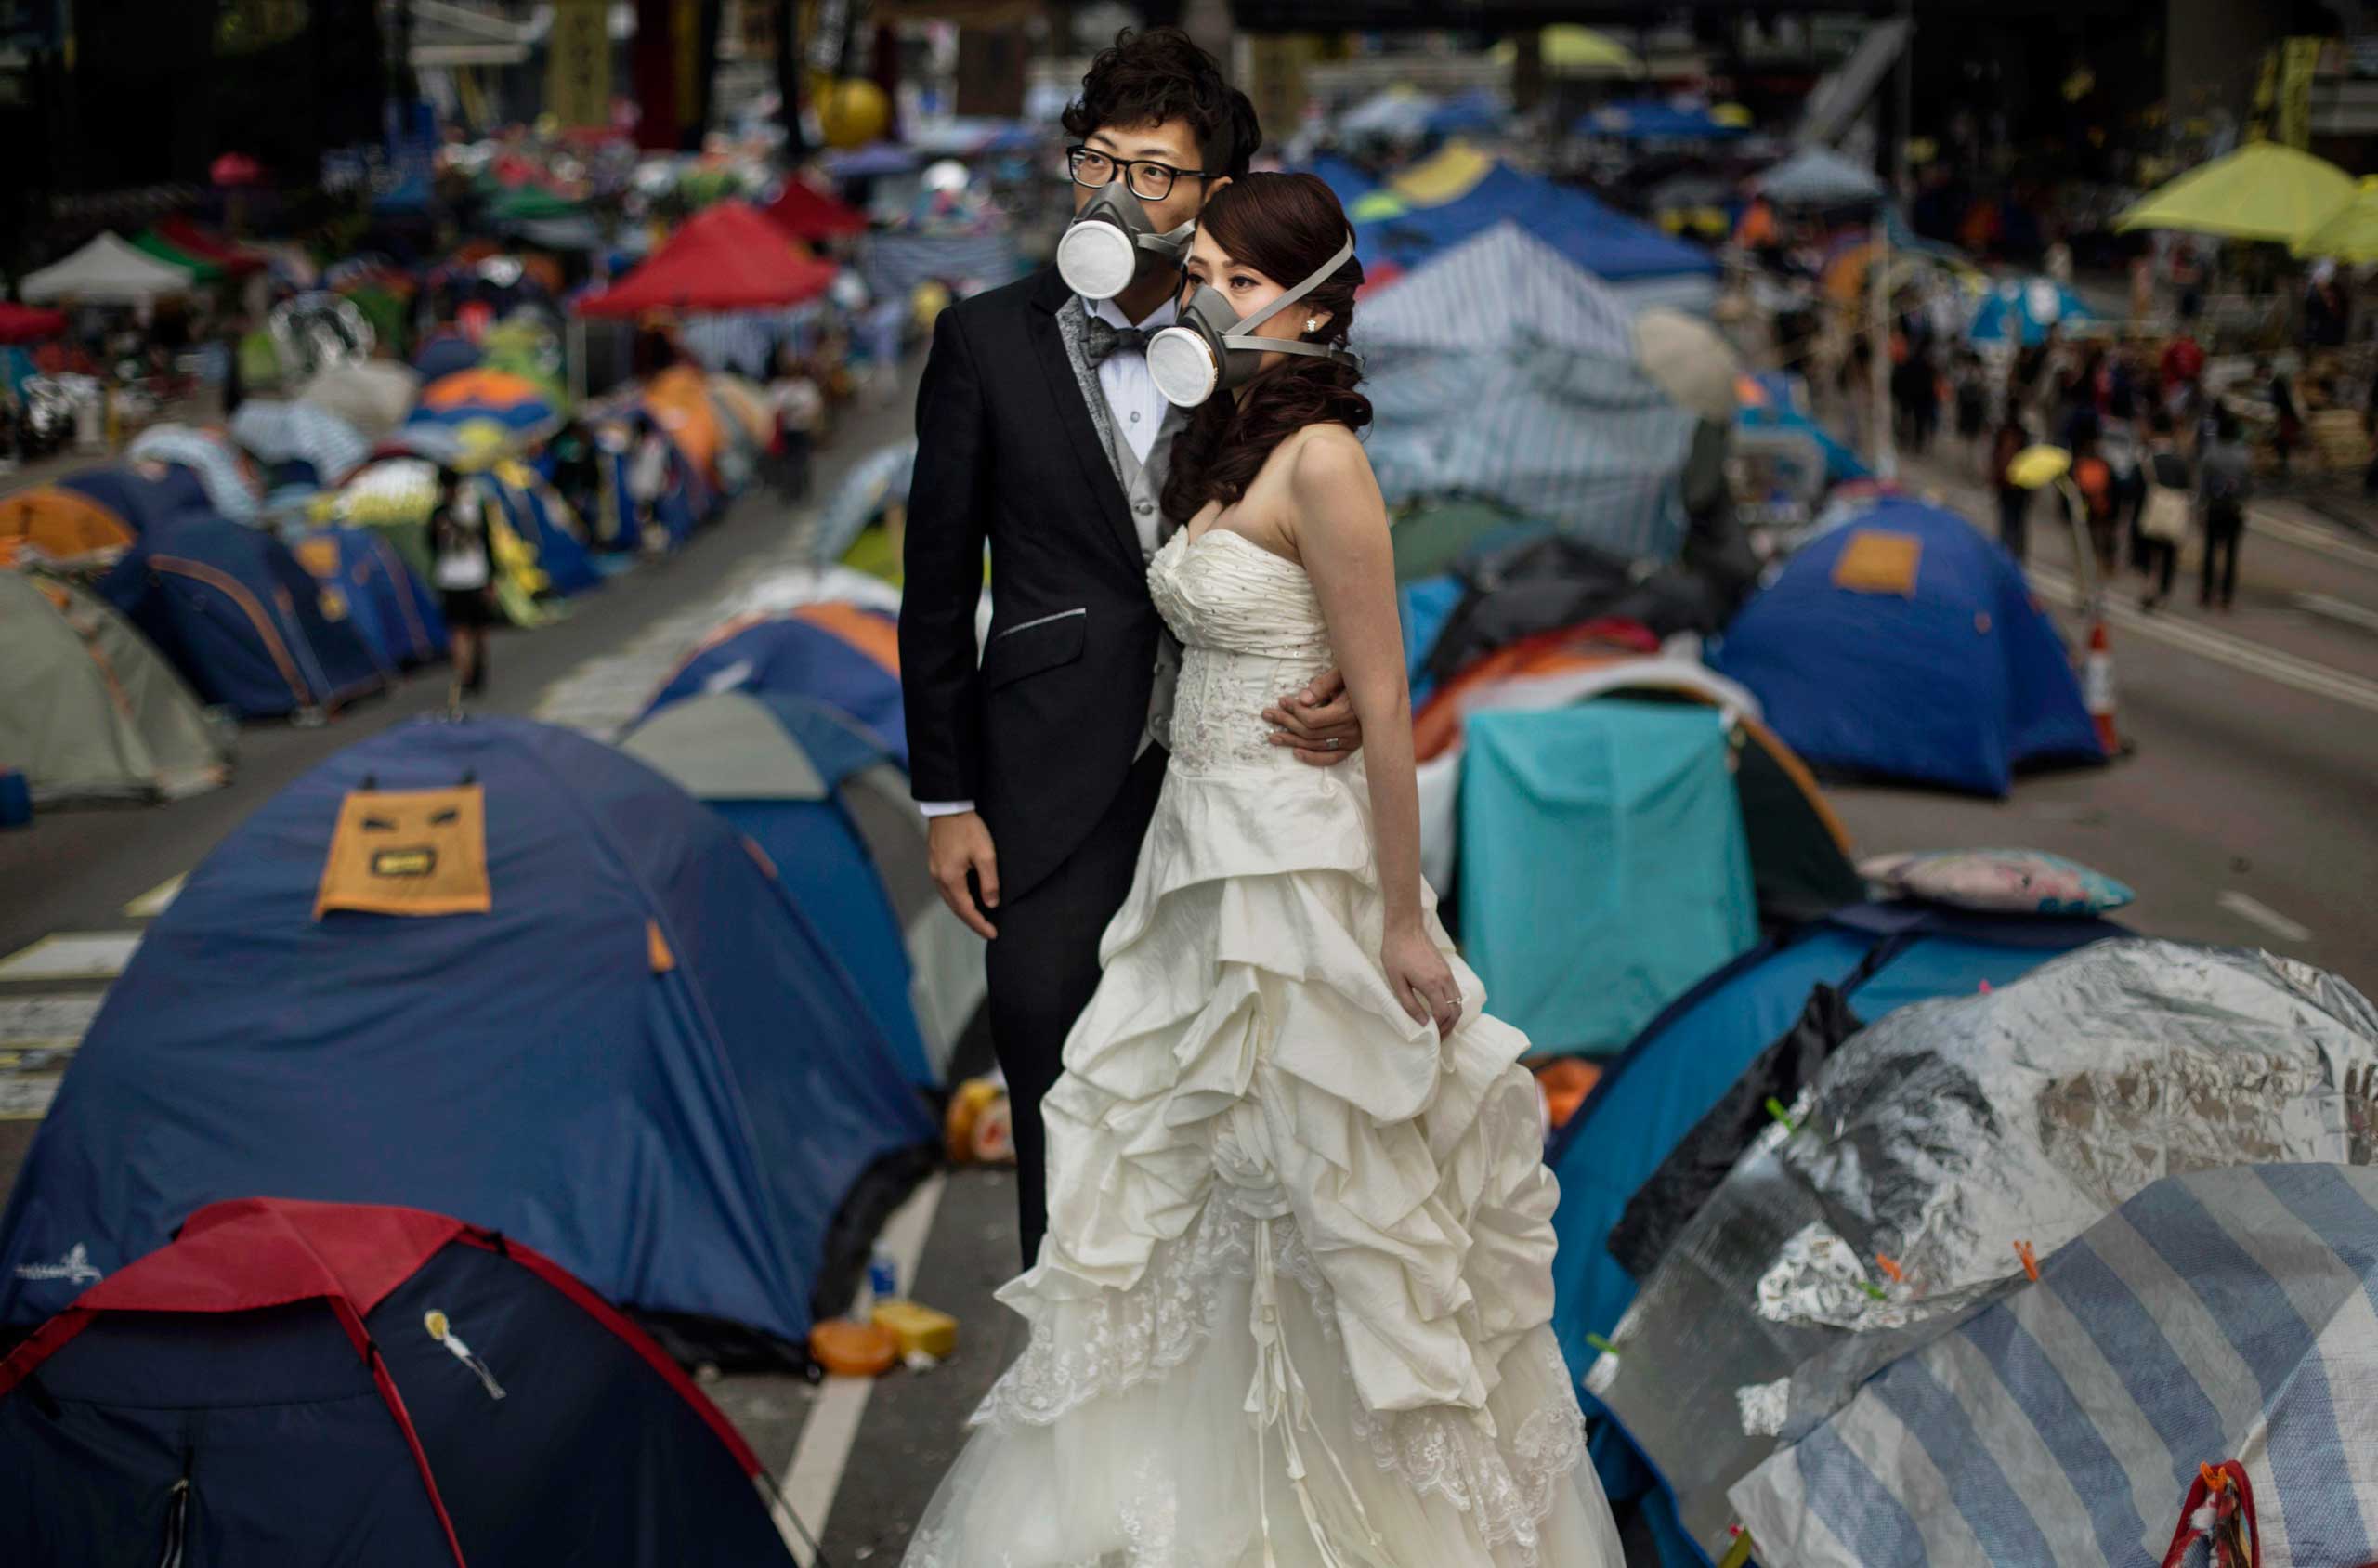 A young Hong Kong couple who did not give their names wear gas masks as they pose for a wedding photographer prior to their marriage next to the tents used by pro-deocracy demonstrators at the Admiralty protest site on Nov. 14, 2014 in Hong Kong.